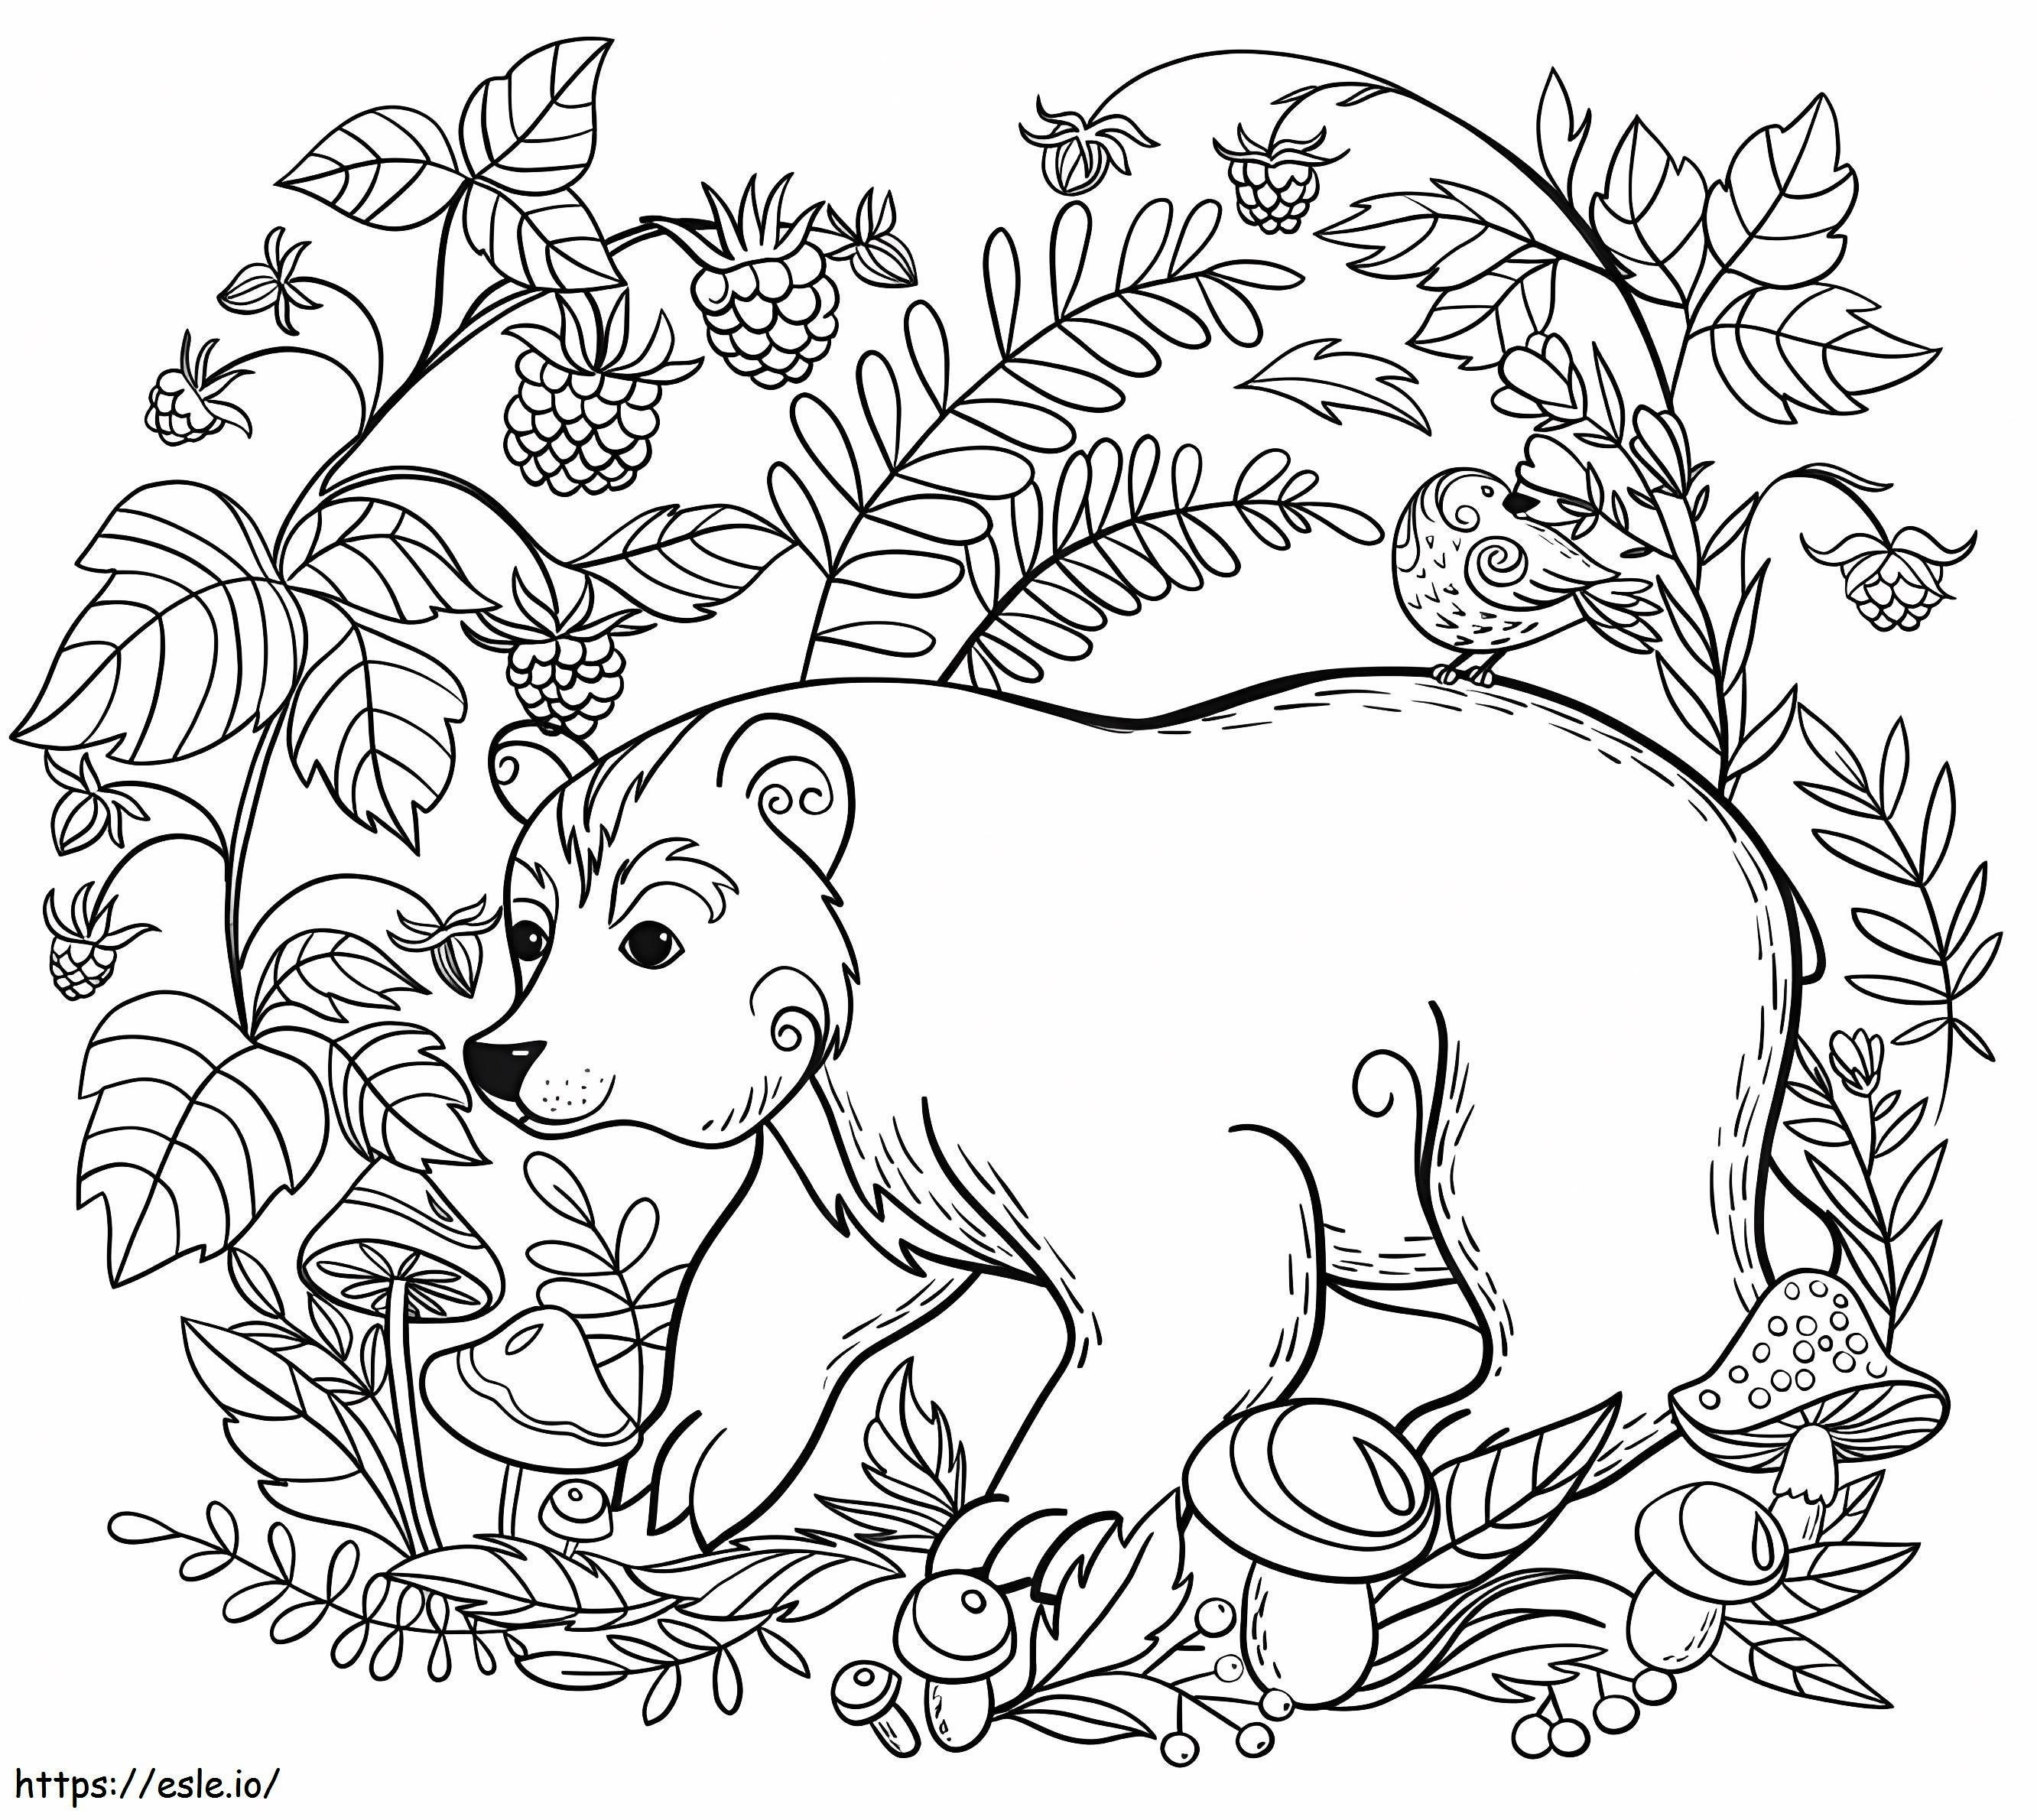 1560155322 Bear A4 coloring page